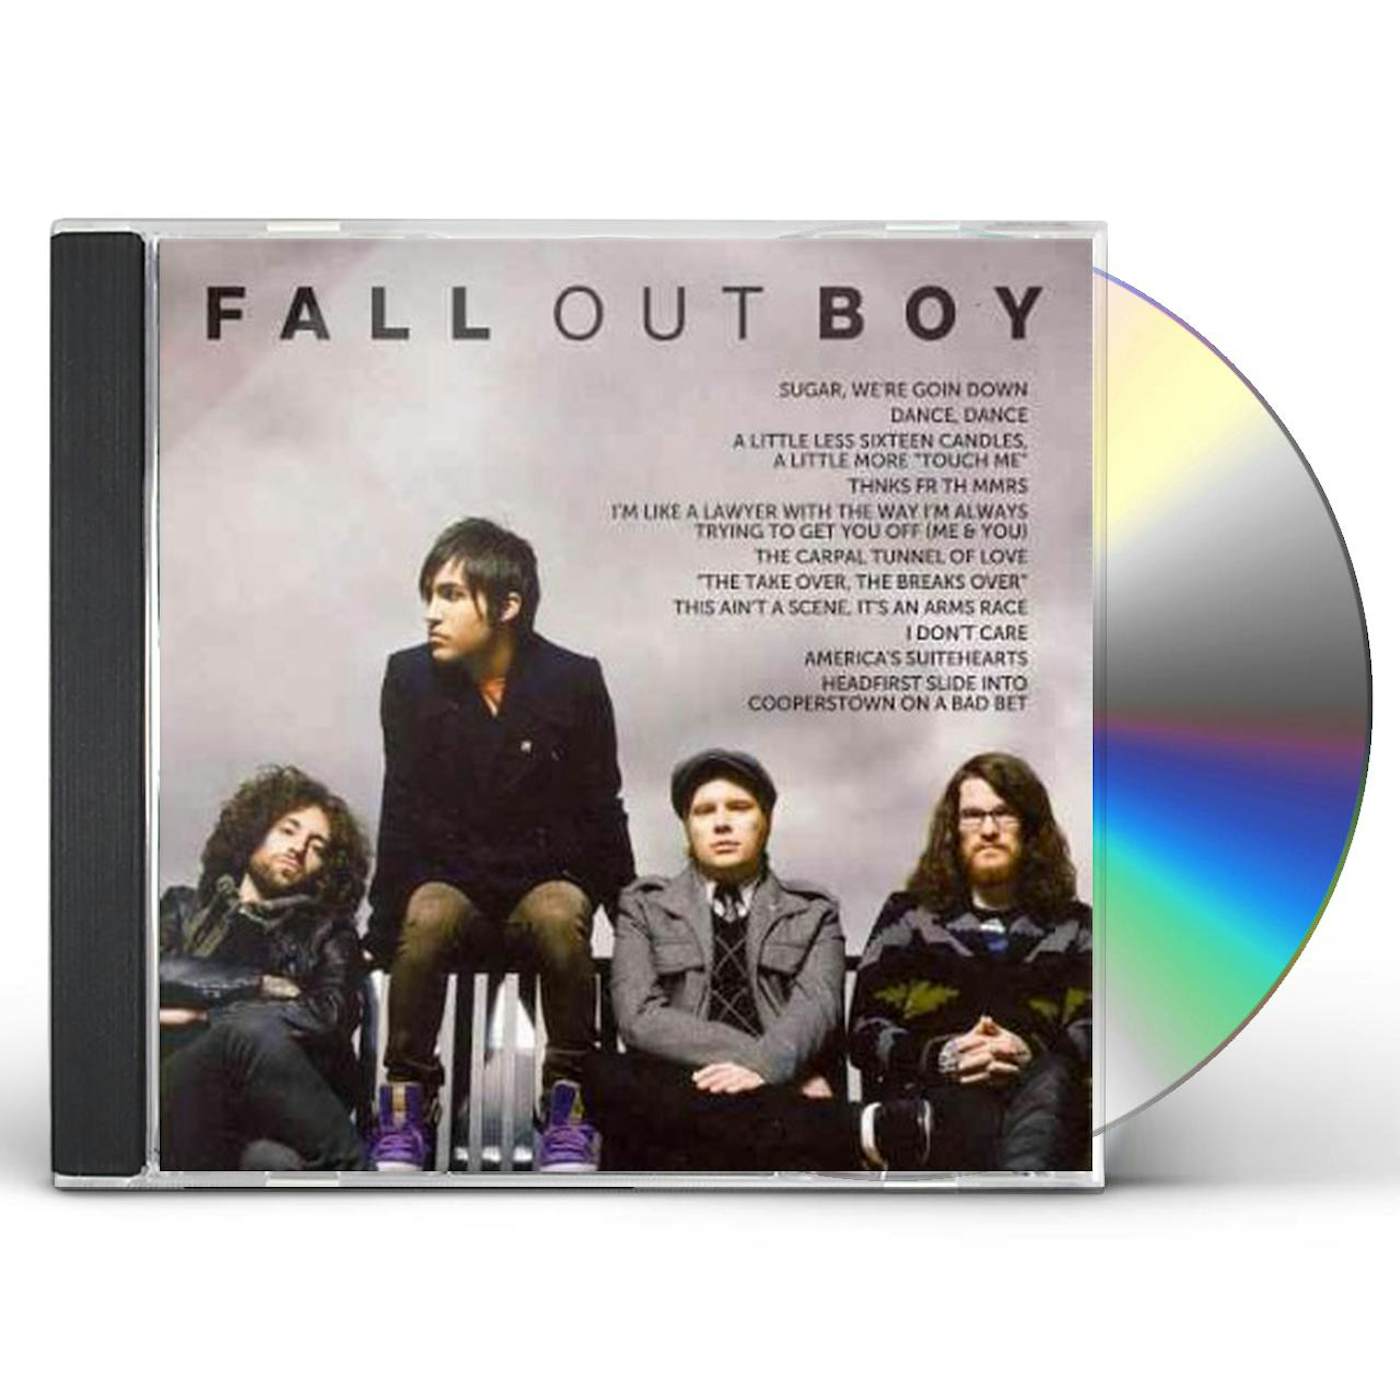 Fall Out Boy ICON CD